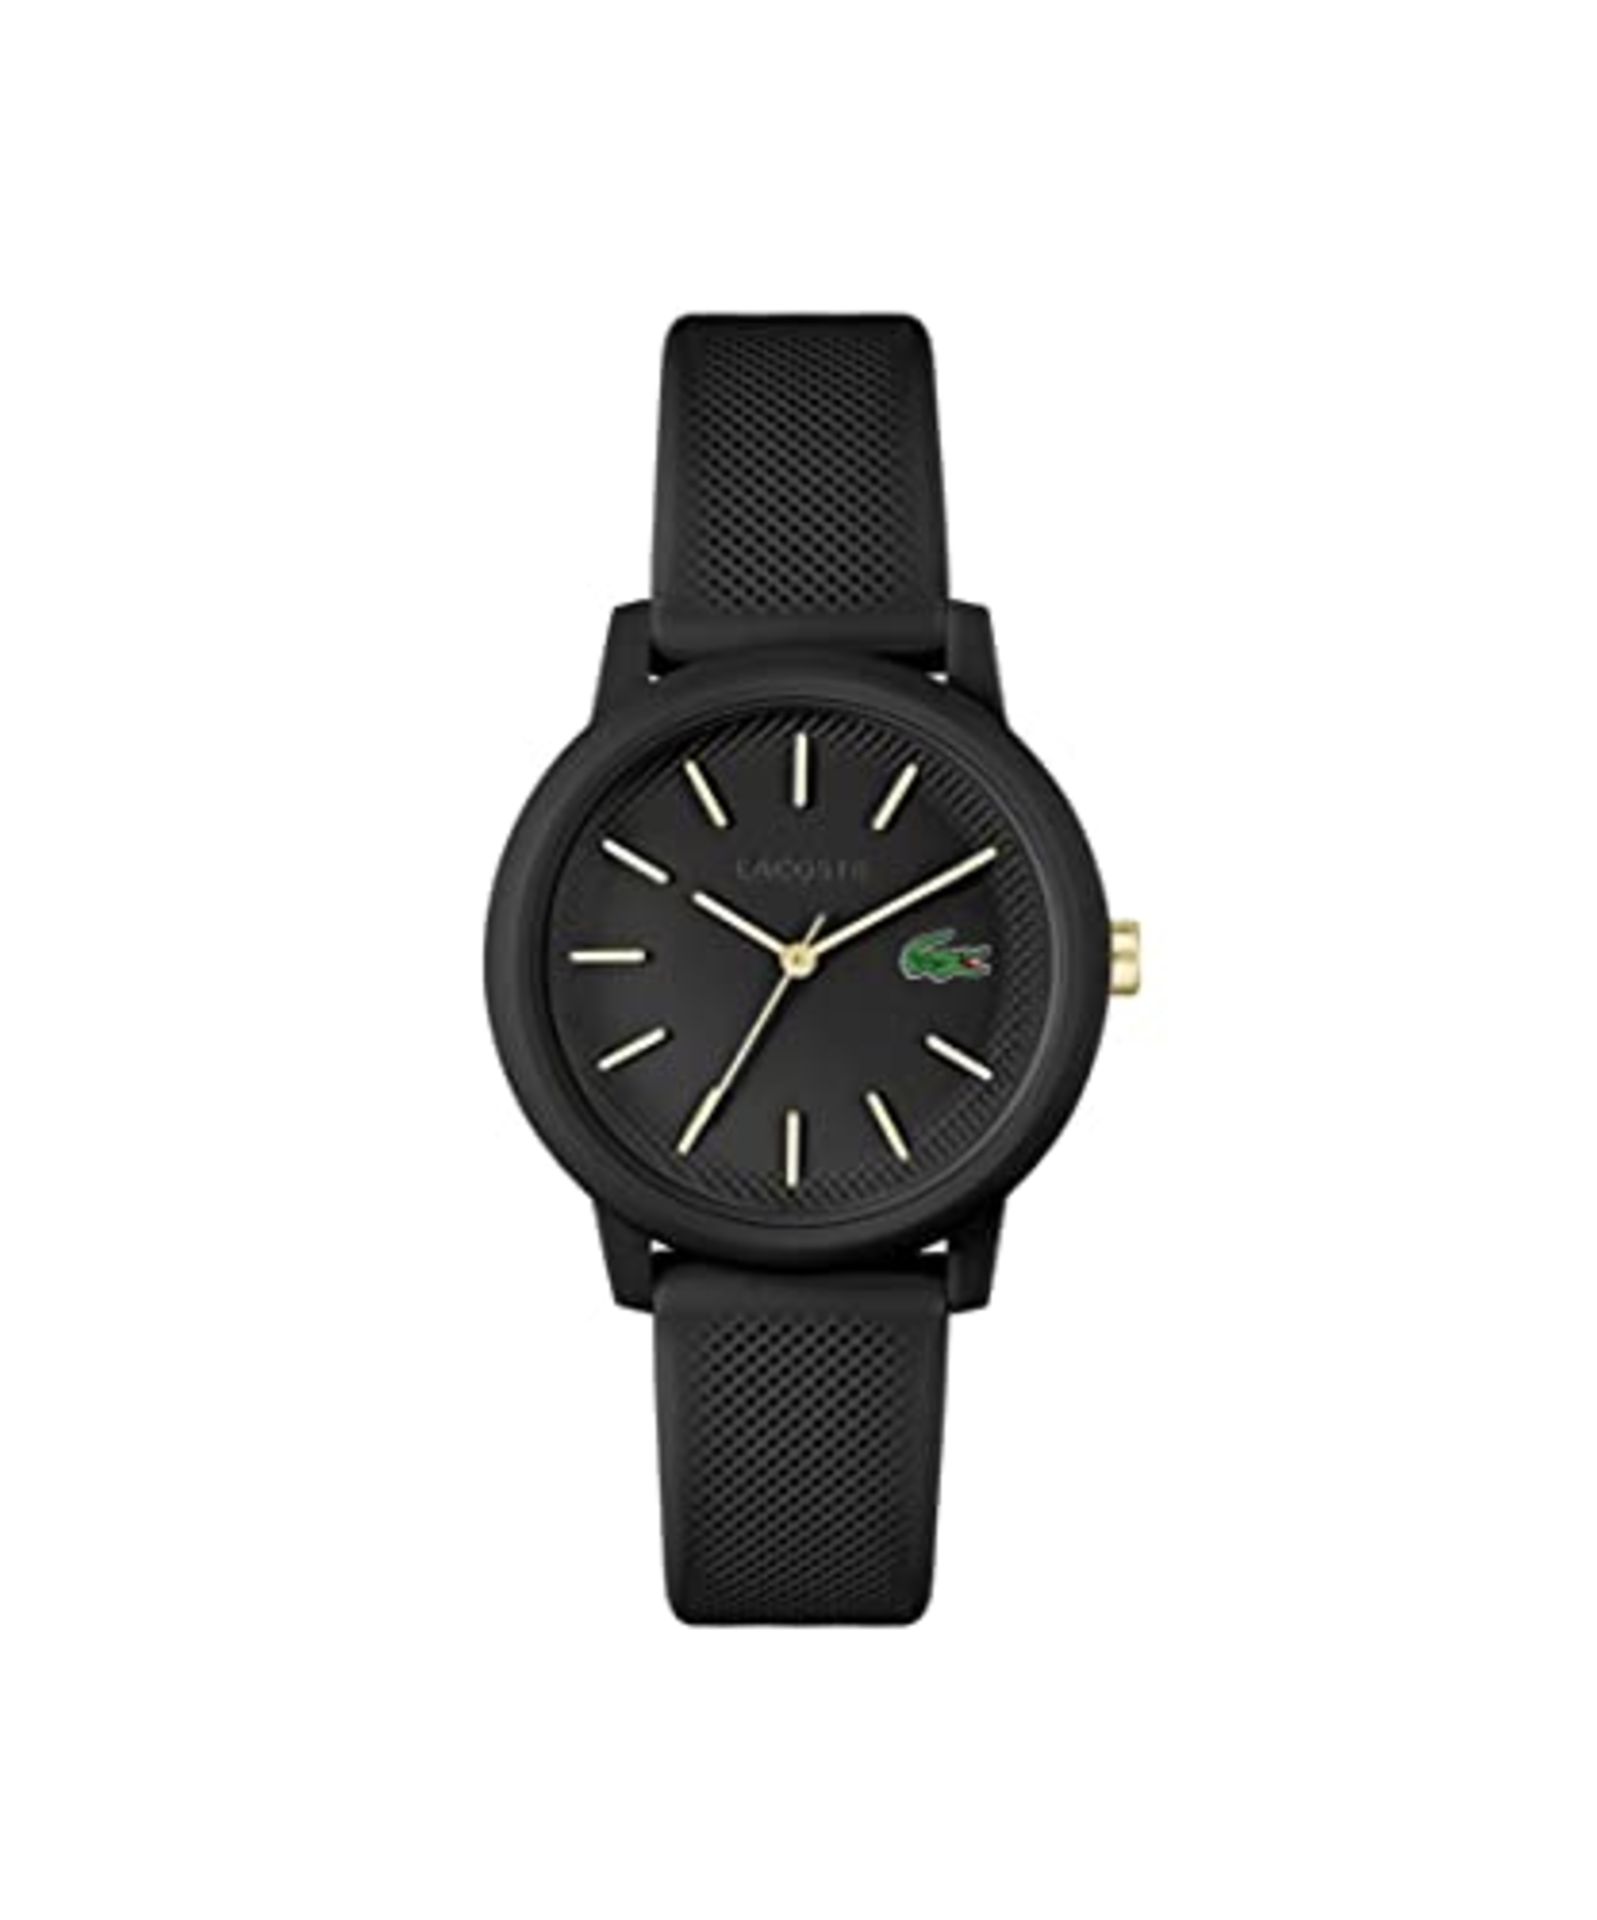 RRP £79.00 Lacoste Unisex Analog Quartz Watch with Silicone Strap